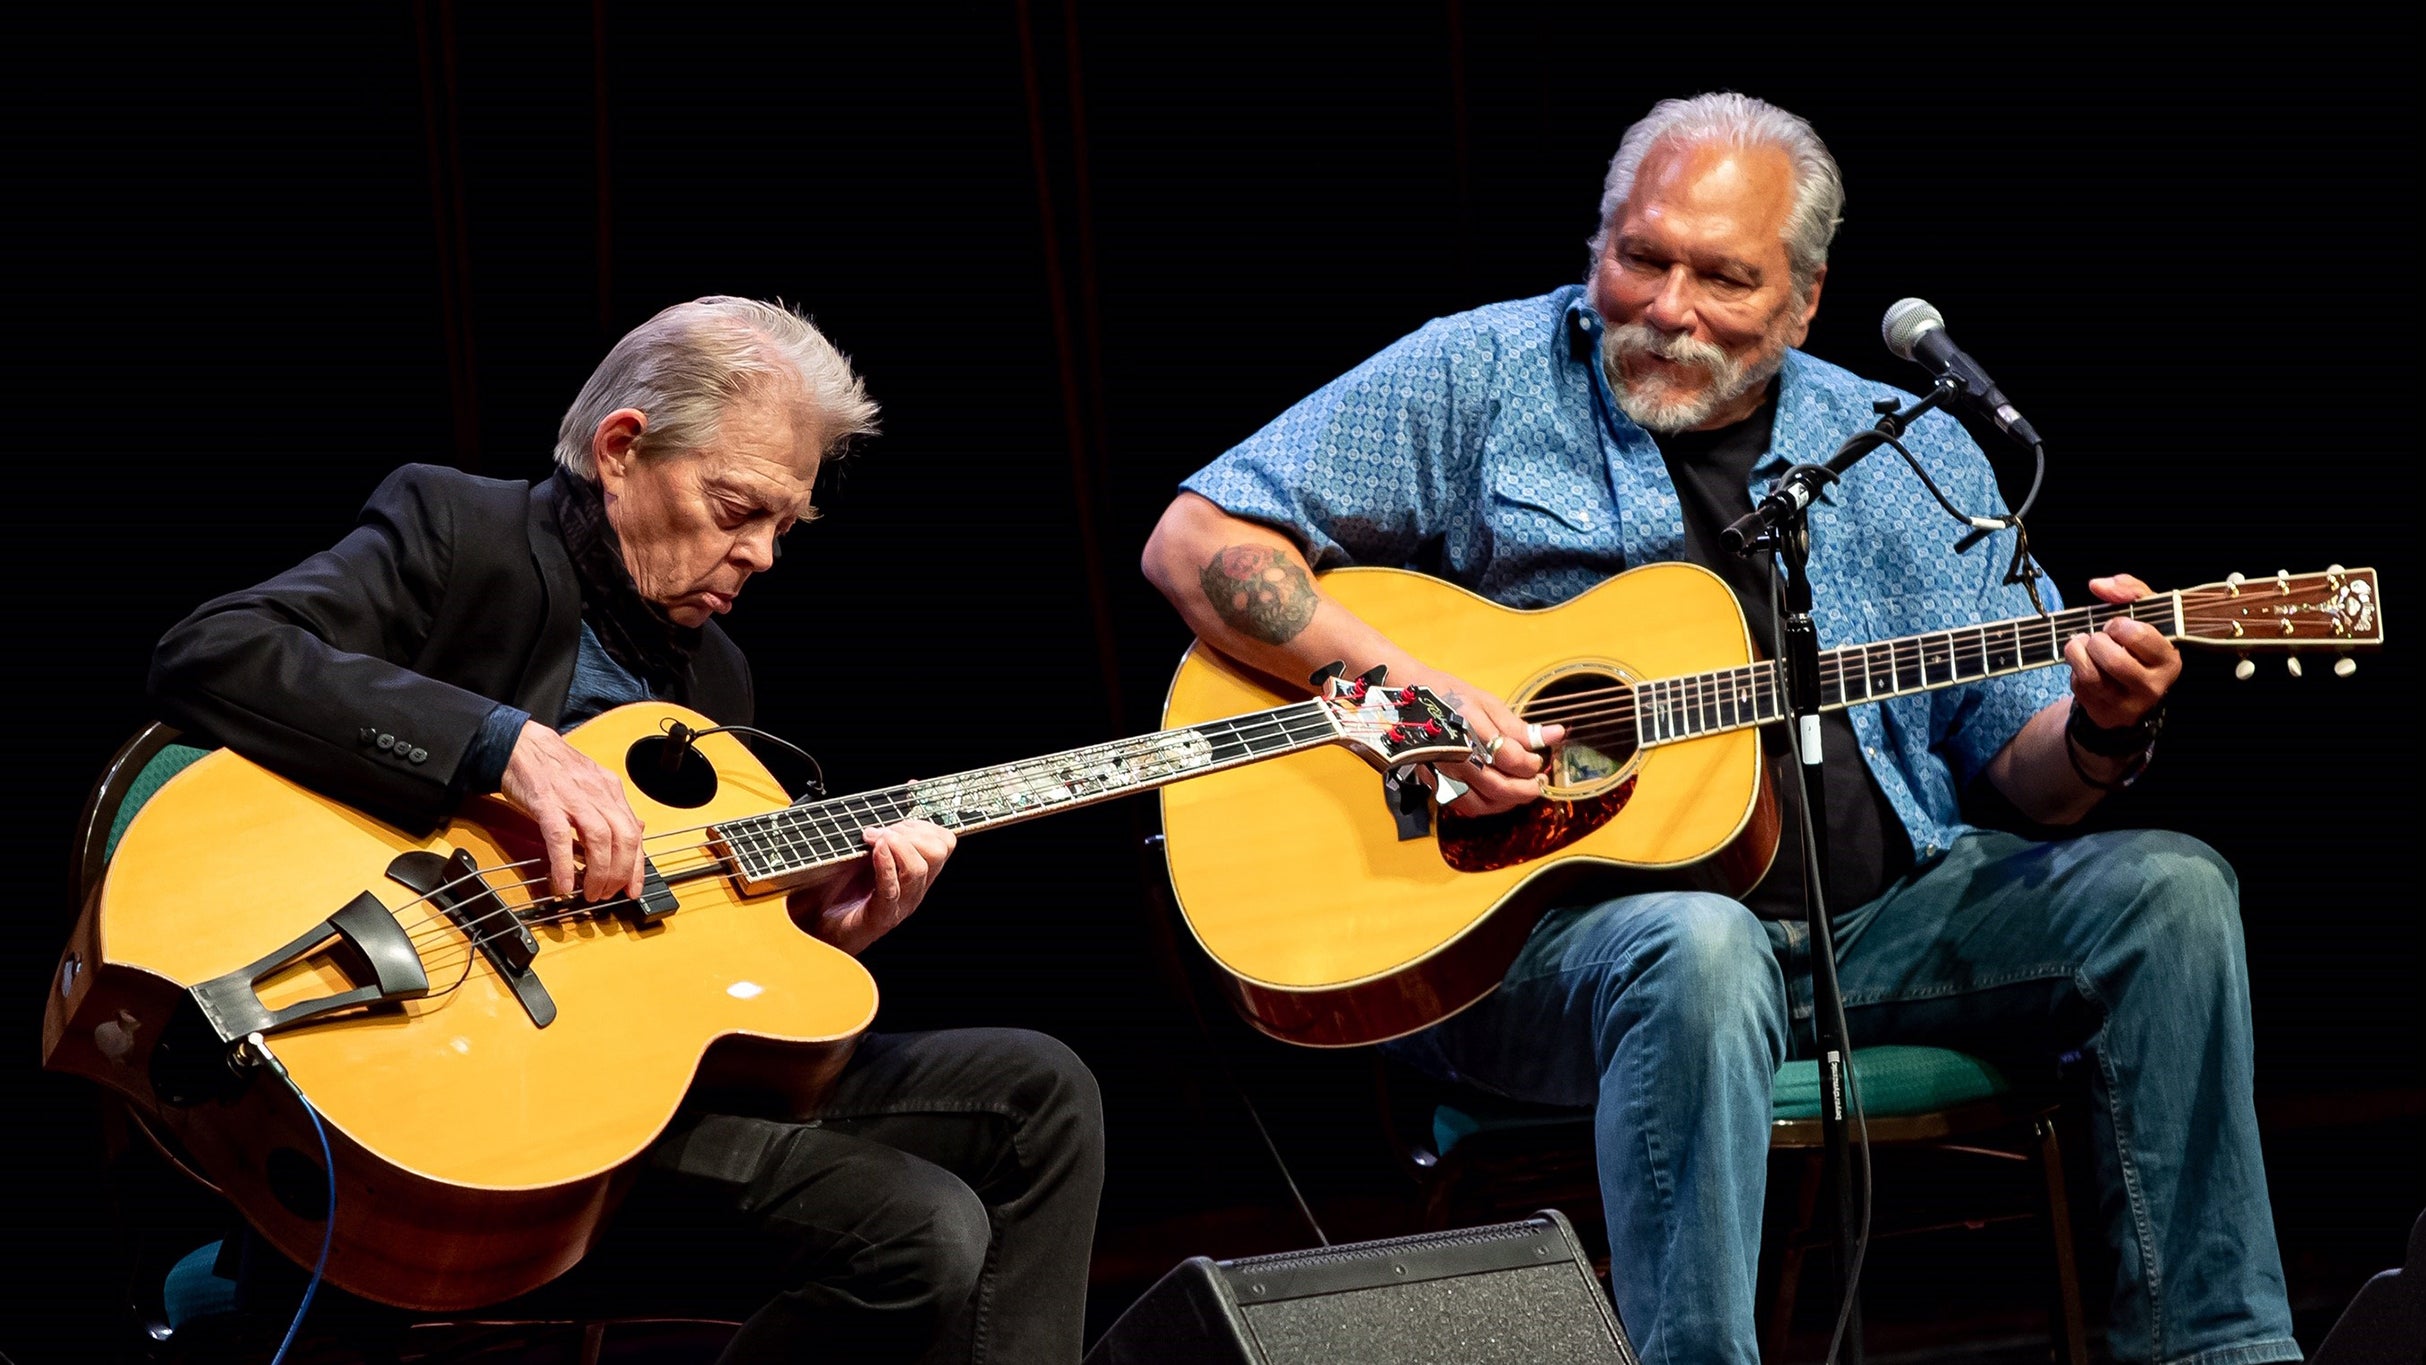 members only presale passcode for Hot Tuna advanced tickets in Huntington at The Paramount